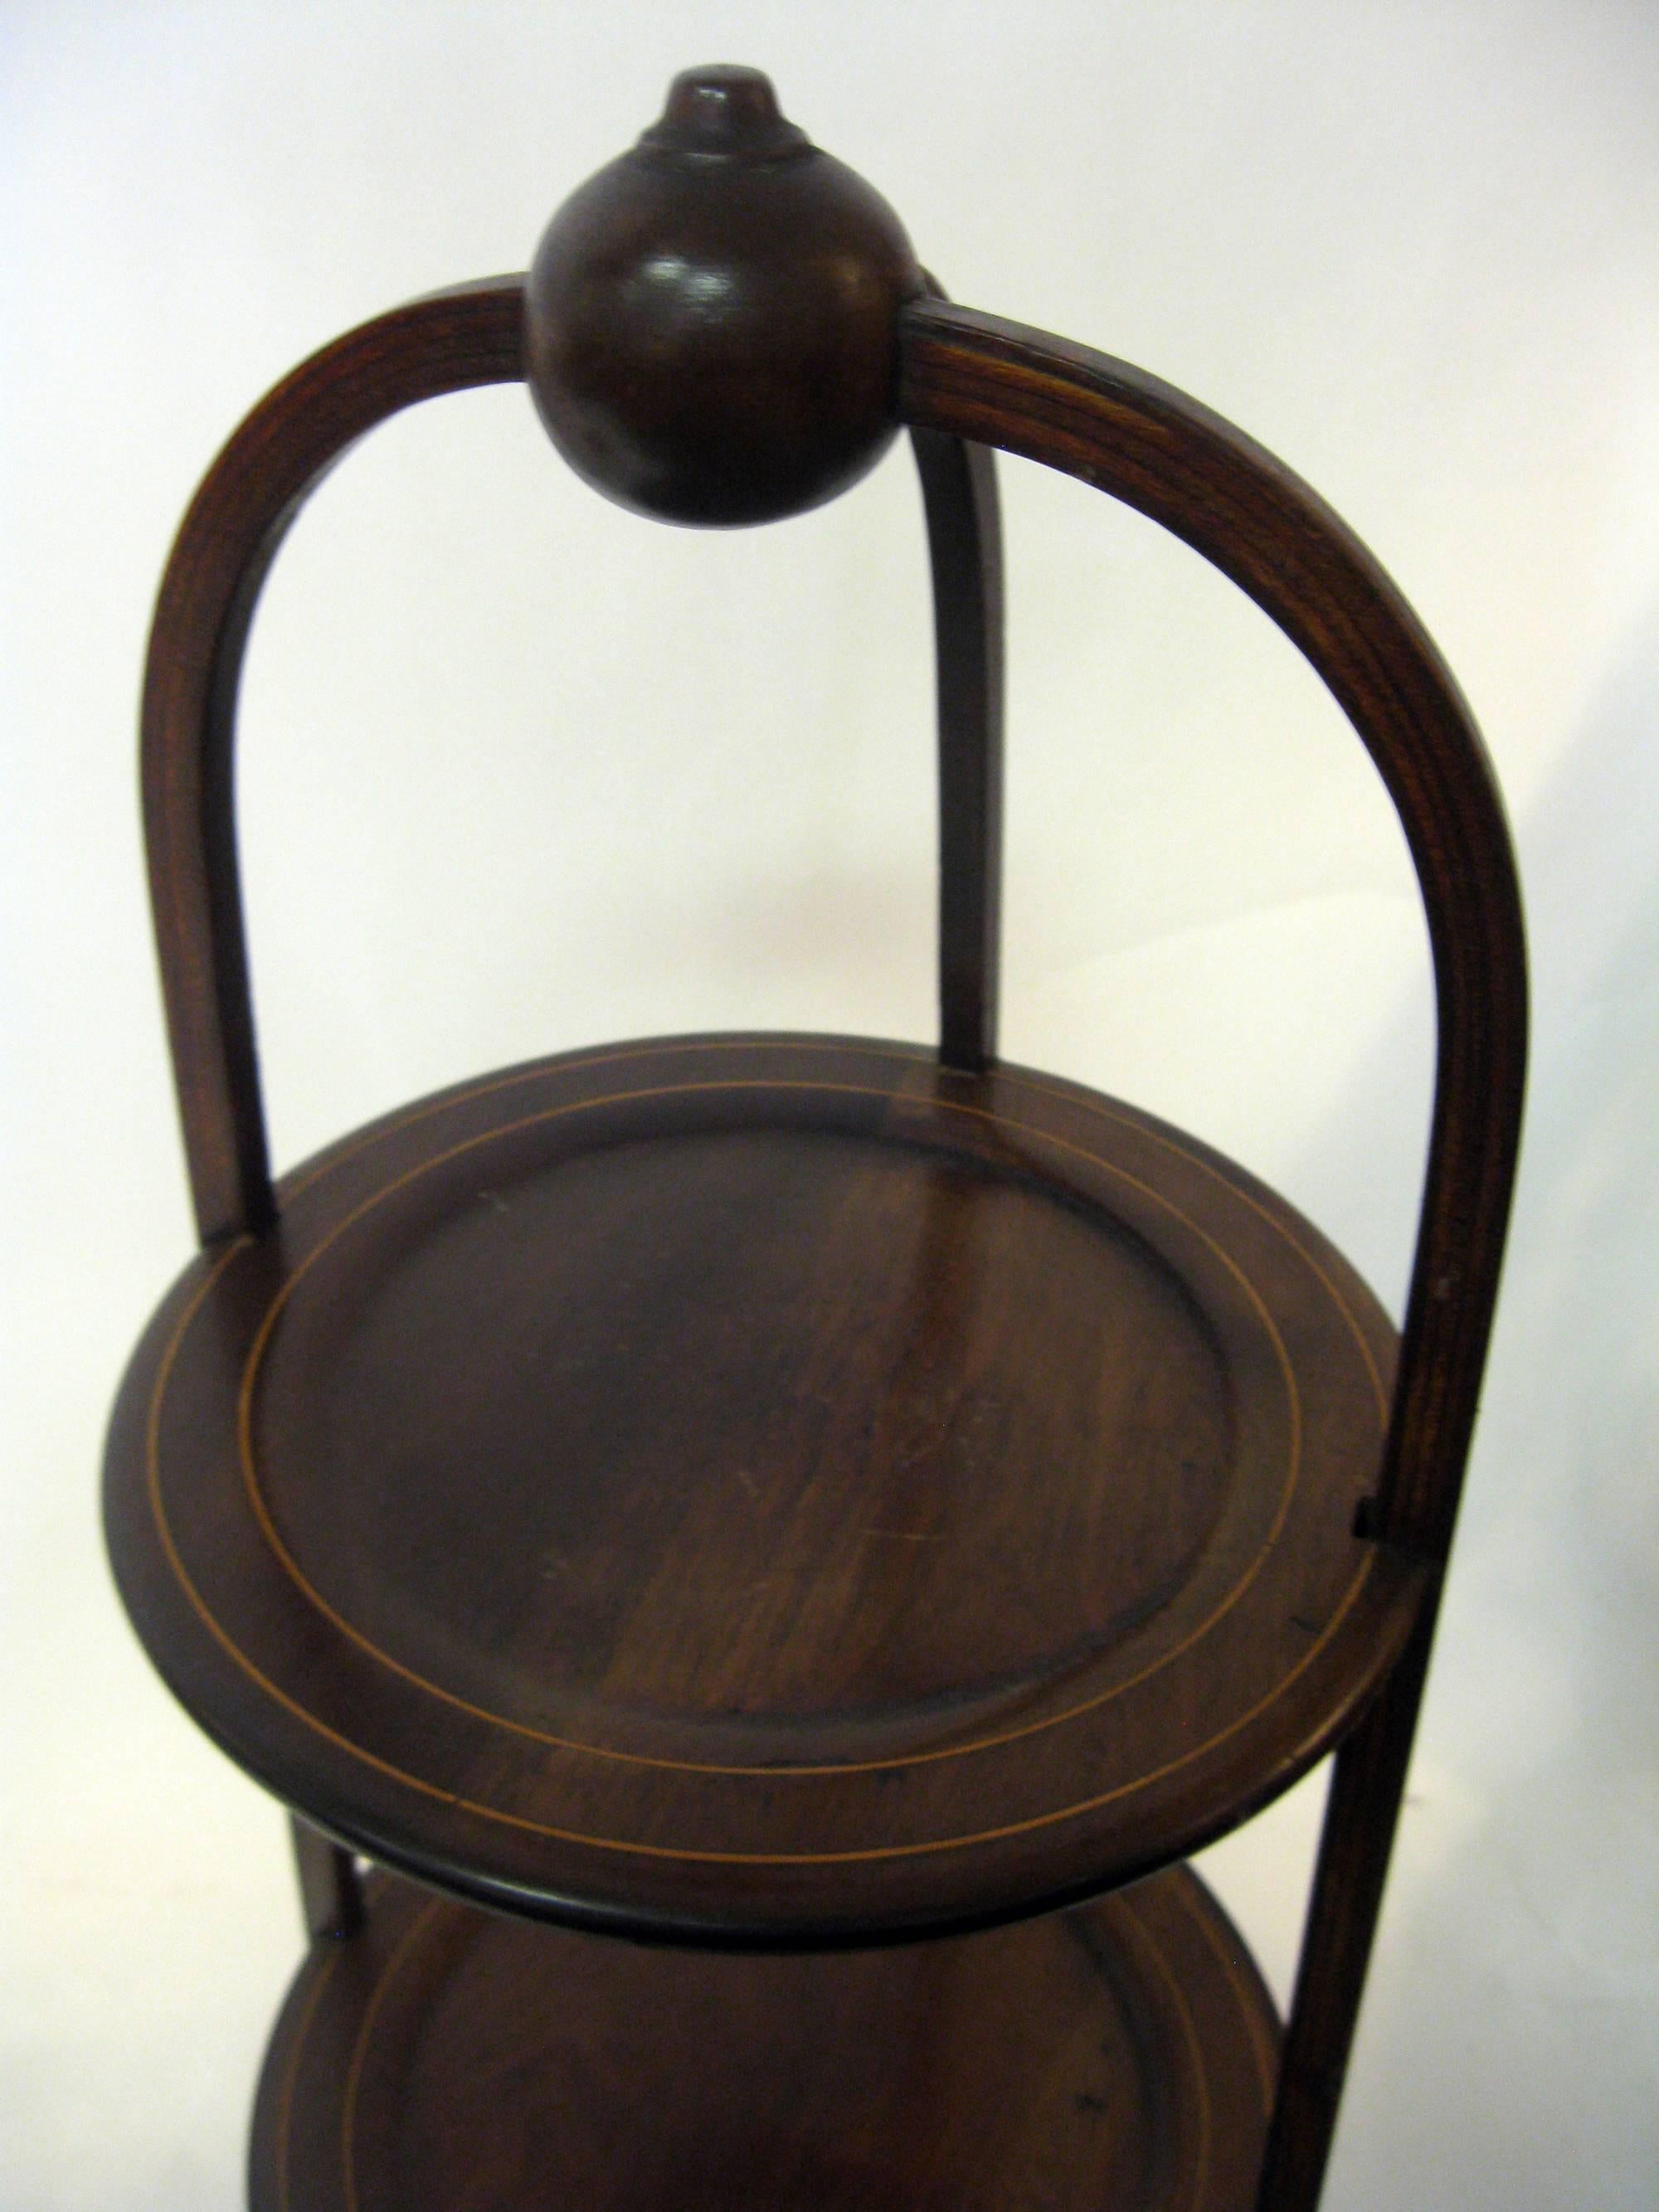 Mahogany muffin stand with three graduated sized shelves (Measures: 10 inches at top, 11 inches at middle, 12 inches at bottom) featuring string inlay and large sphere top ornament.